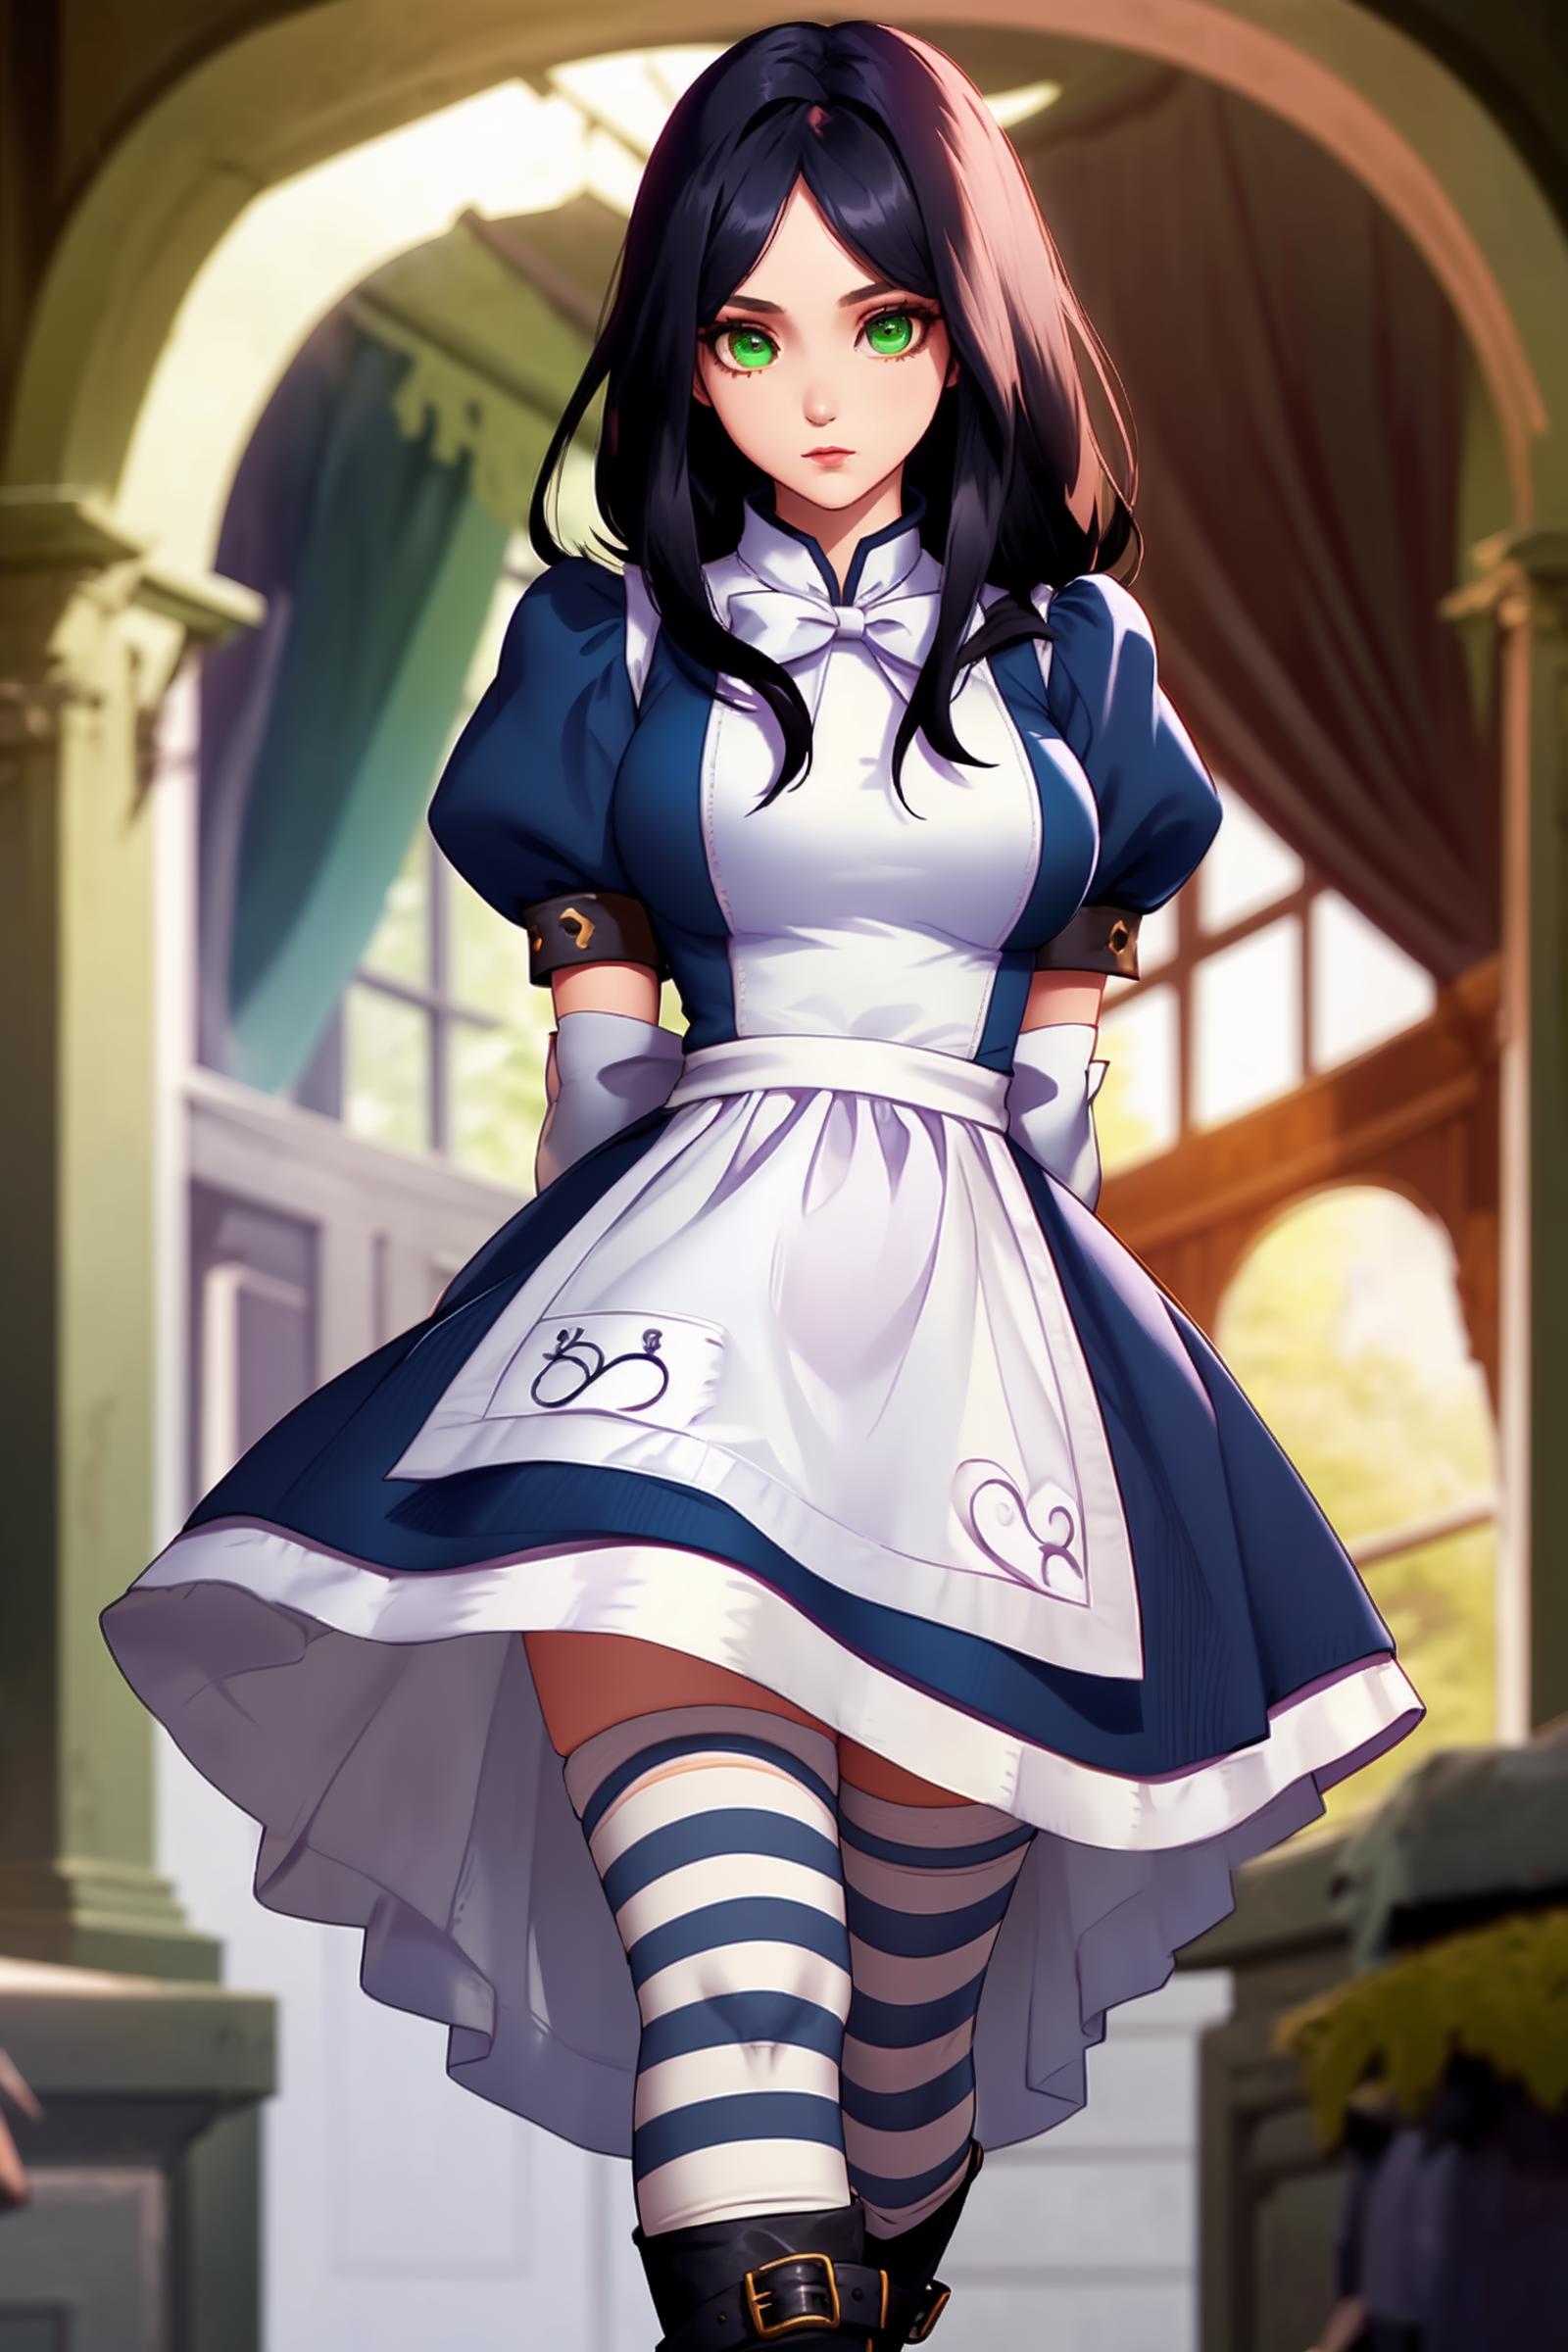 Alice Liddell | American McGee's Alice image by theway2377